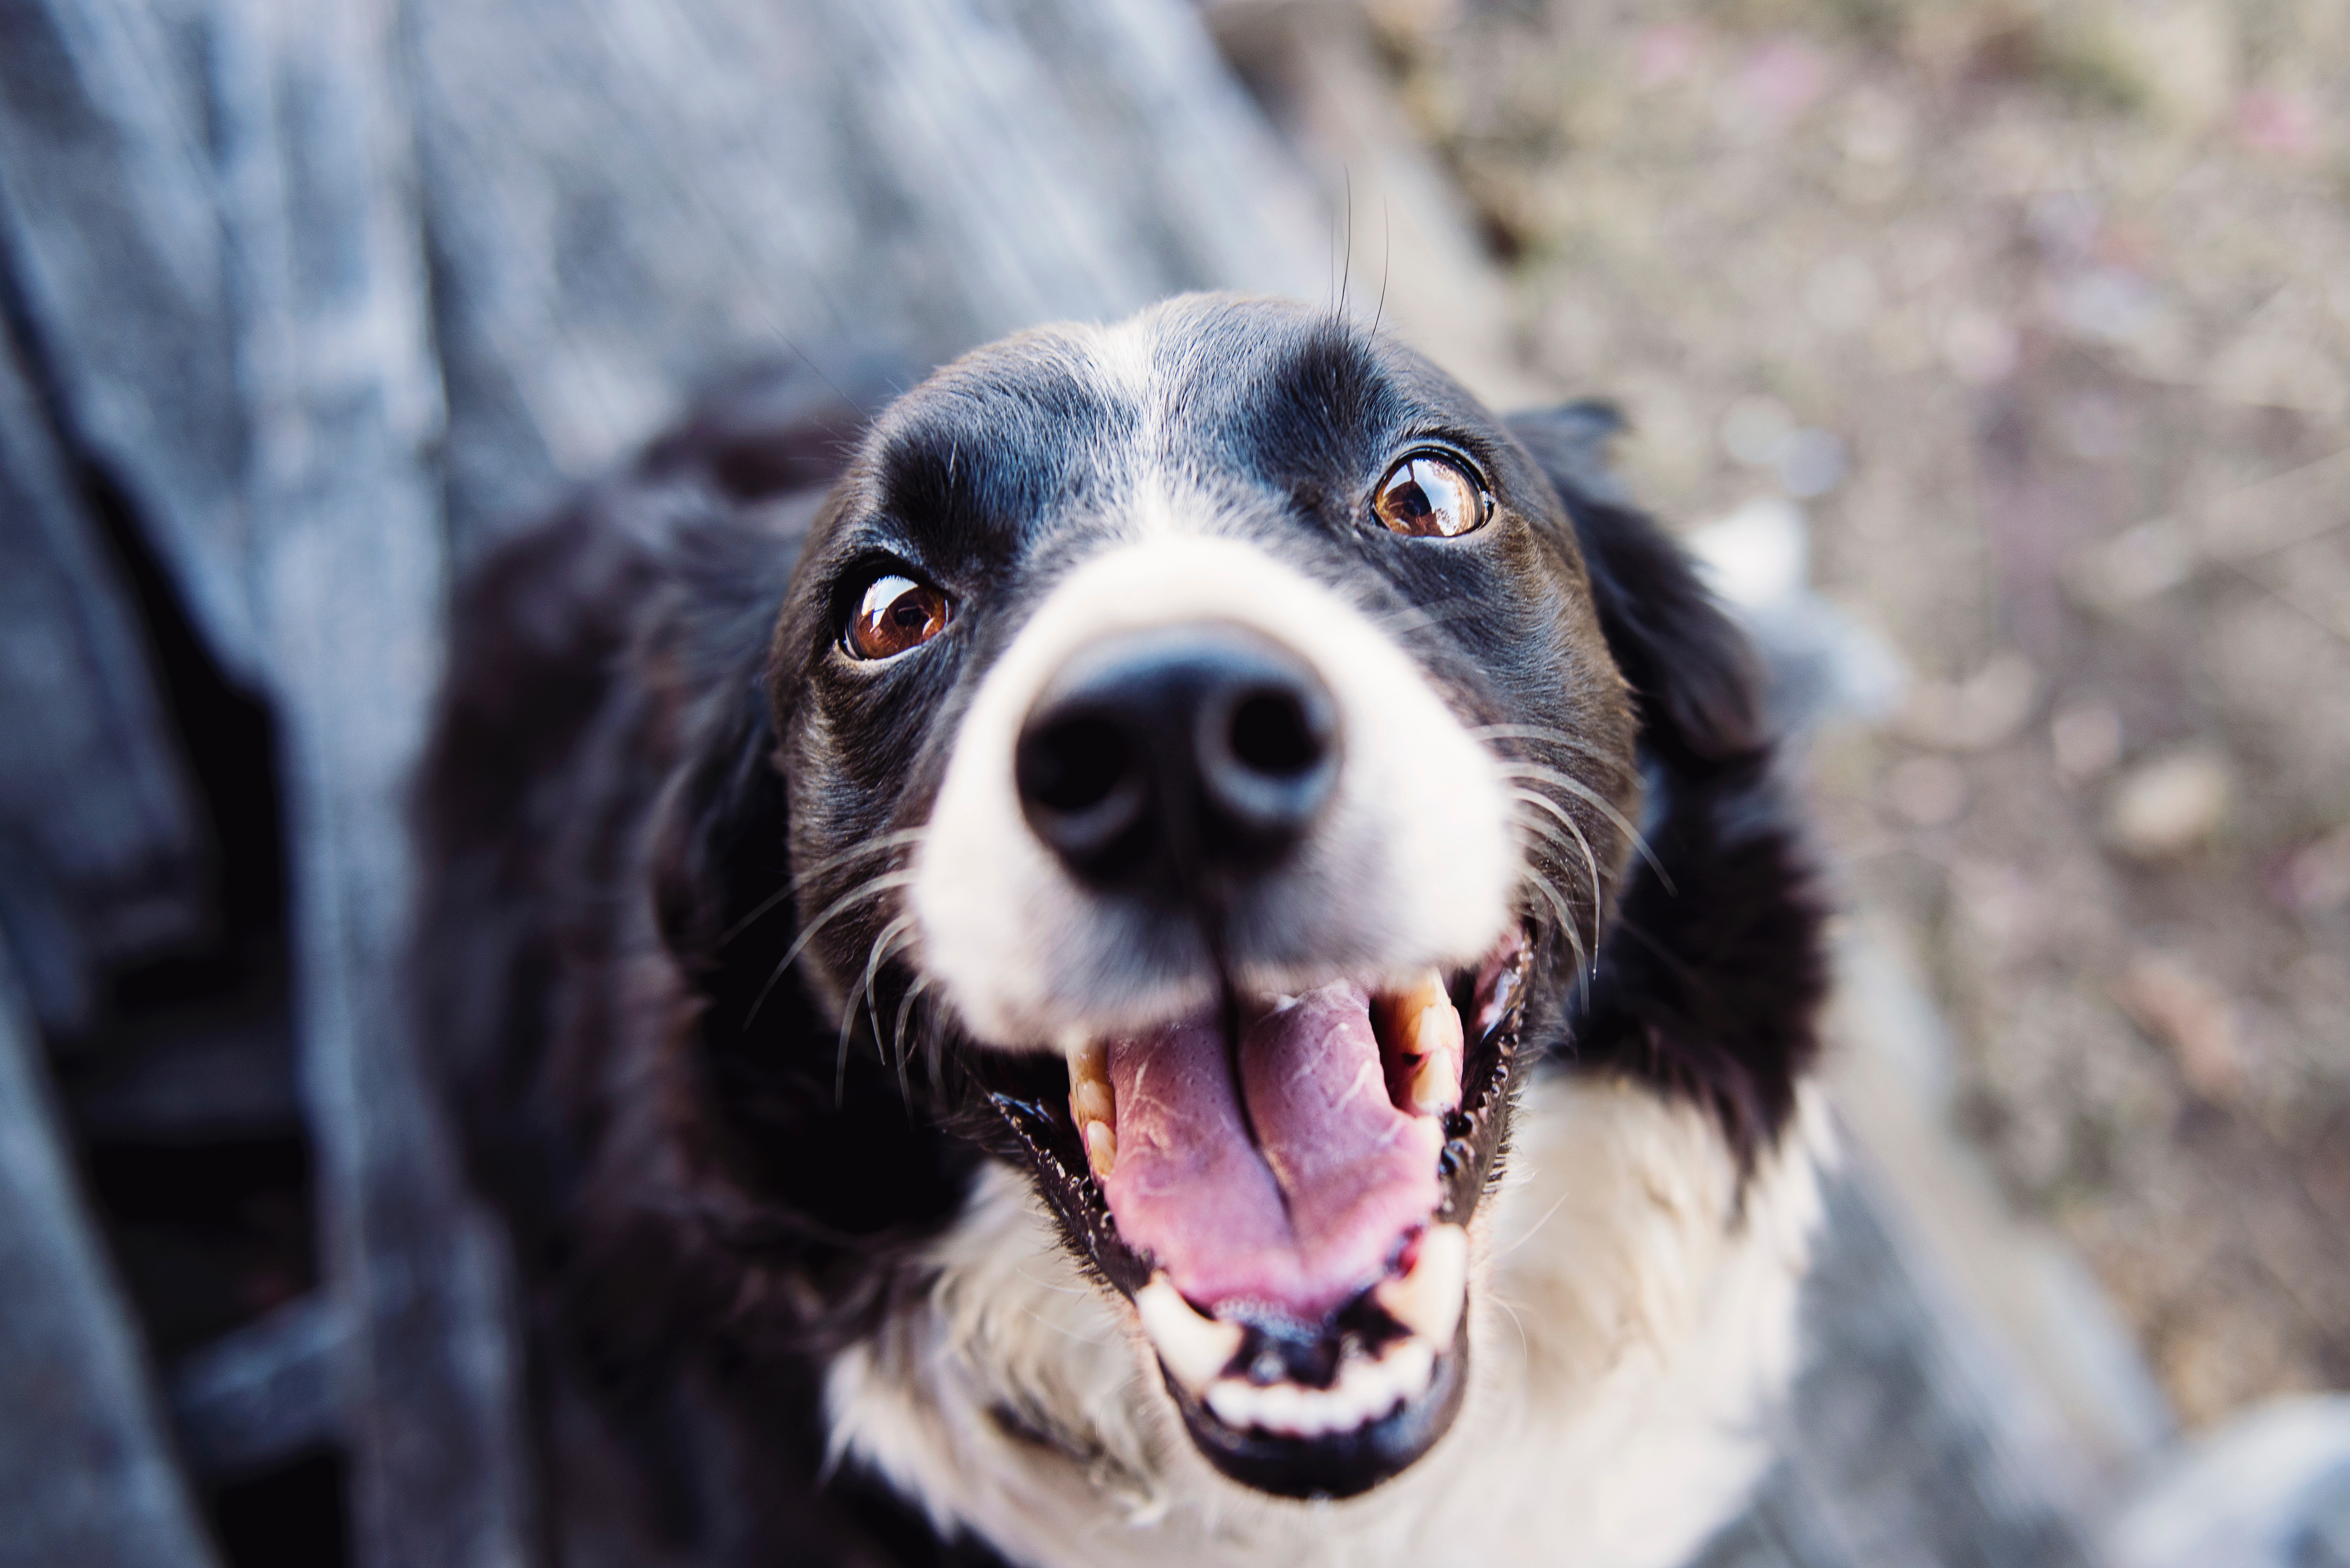 Black and white colored dog, with tongue hanging from mouth, smiling at the camera